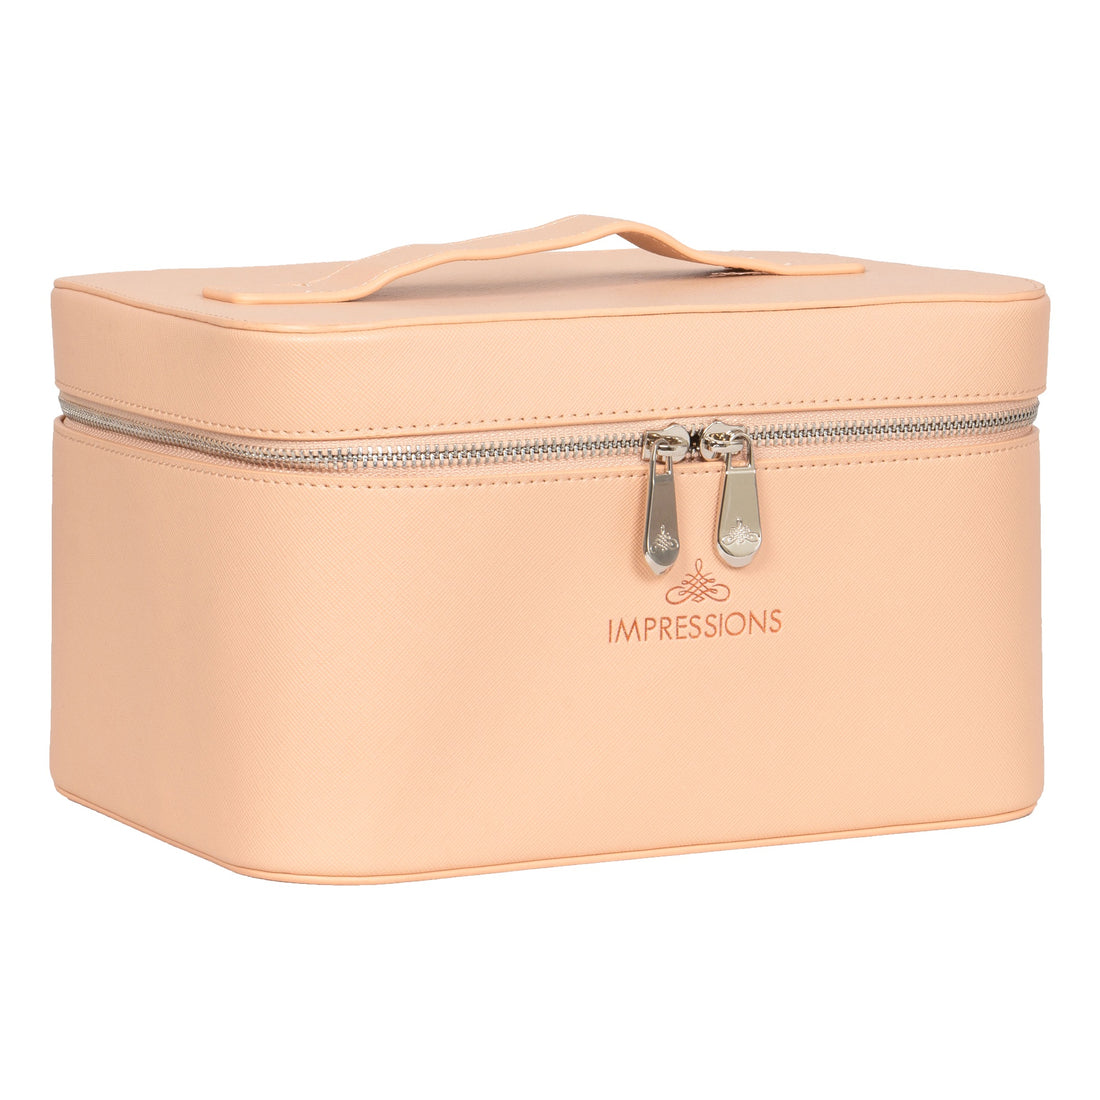 Shop Cosmetic Cases